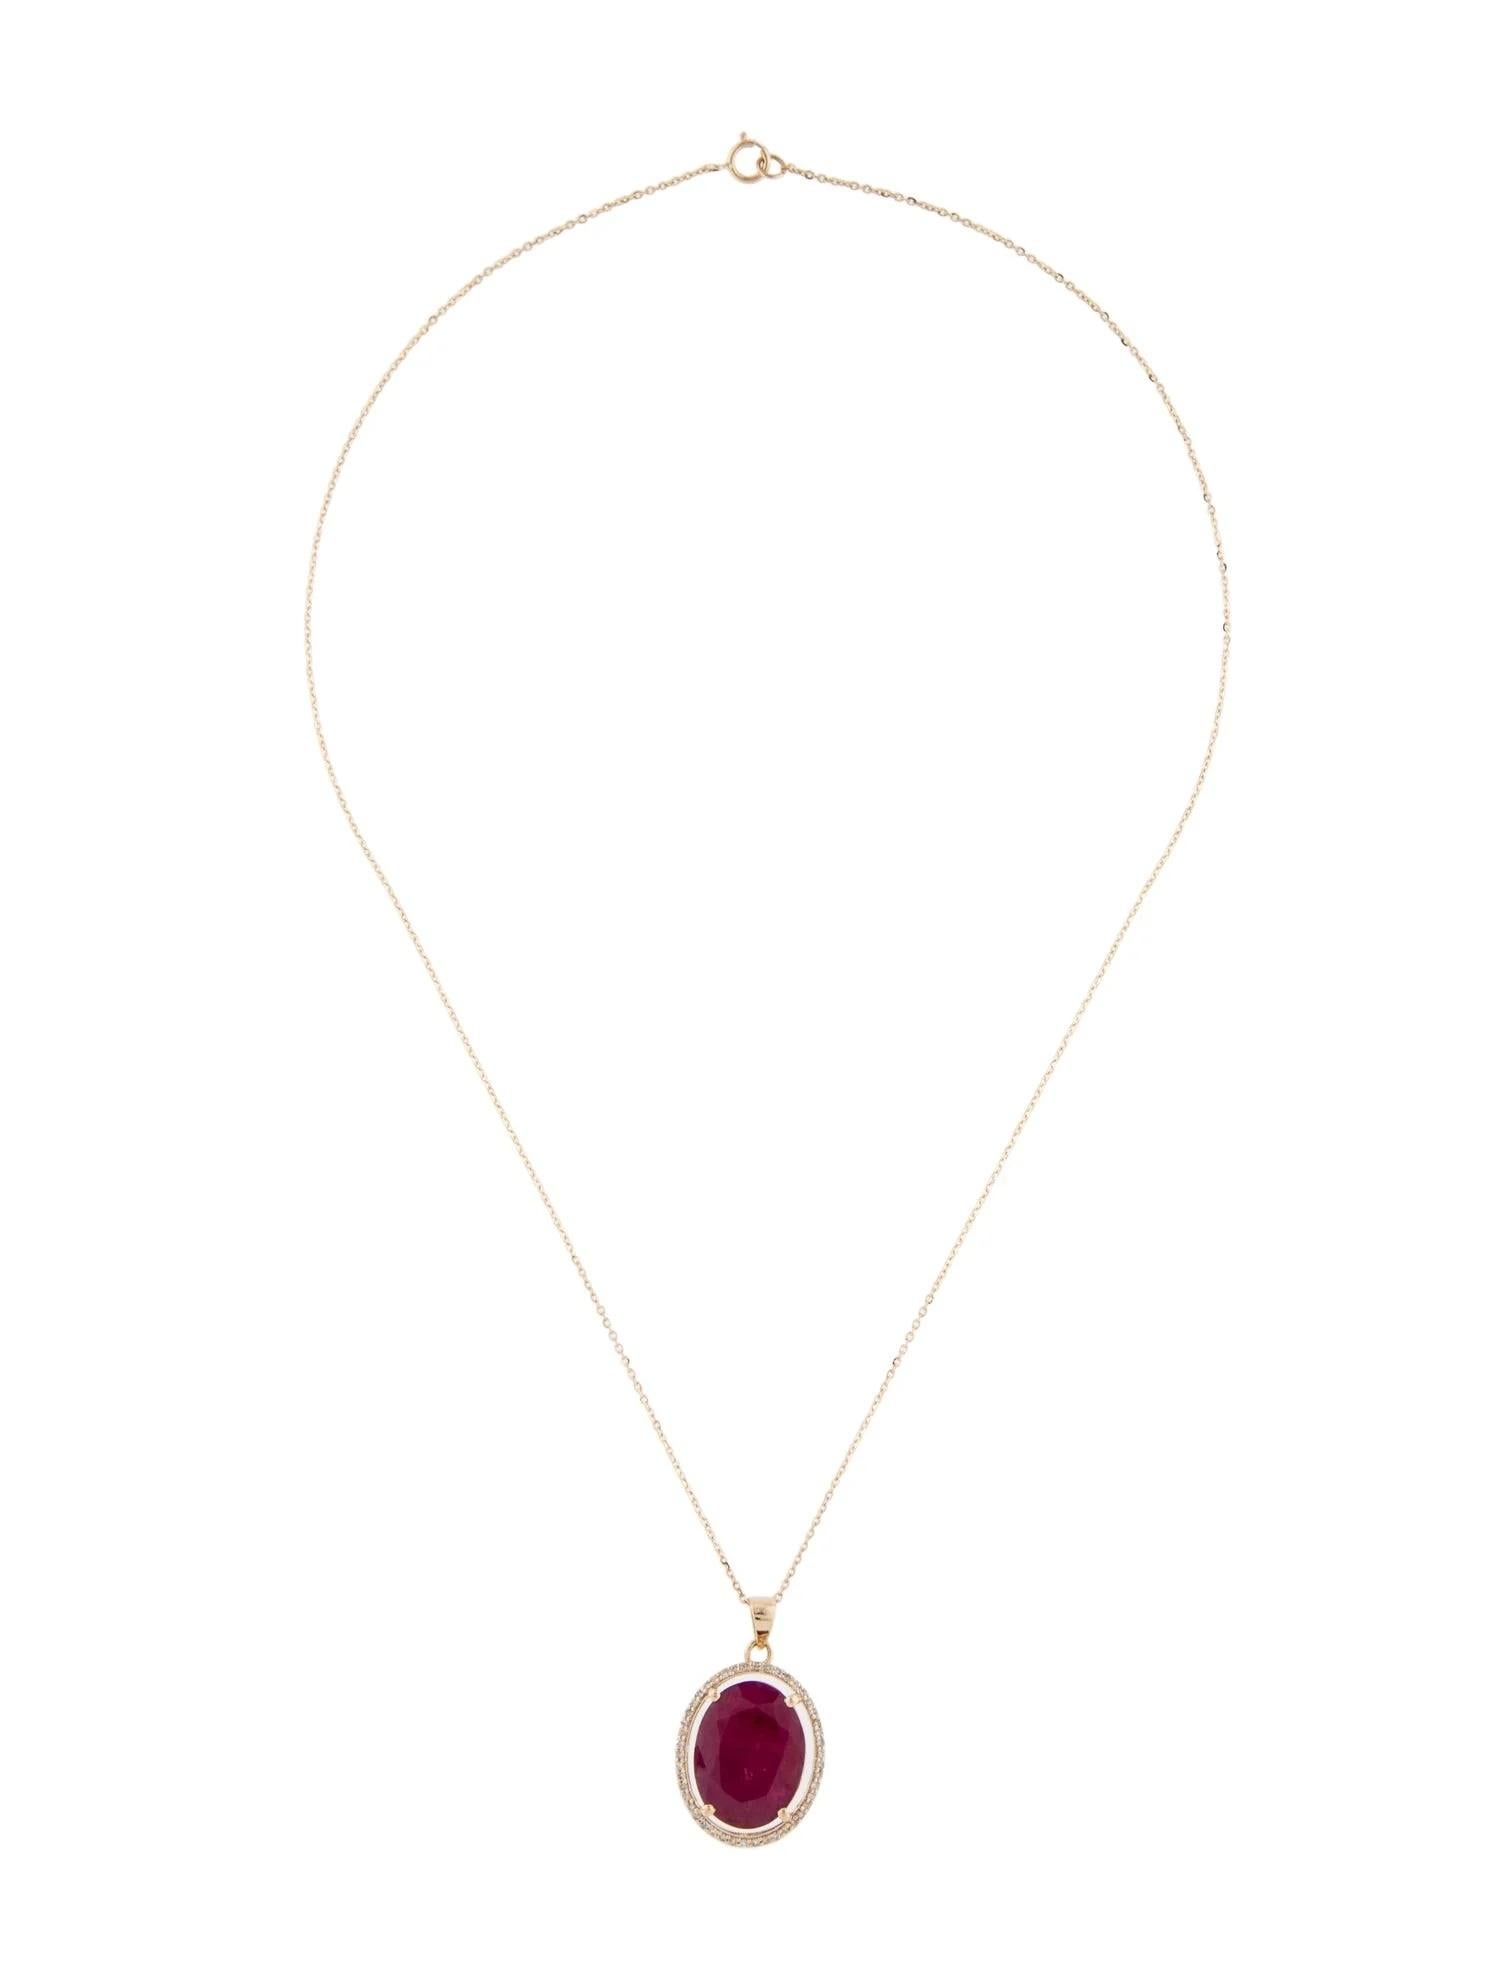 Elevate your jewelry collection with this exquisite 14K yellow gold pendant necklace featuring a captivating faceted oval ruby as its centerpiece. With a remarkable carat weight of 5.42, the vivid red ruby exudes timeless elegance and